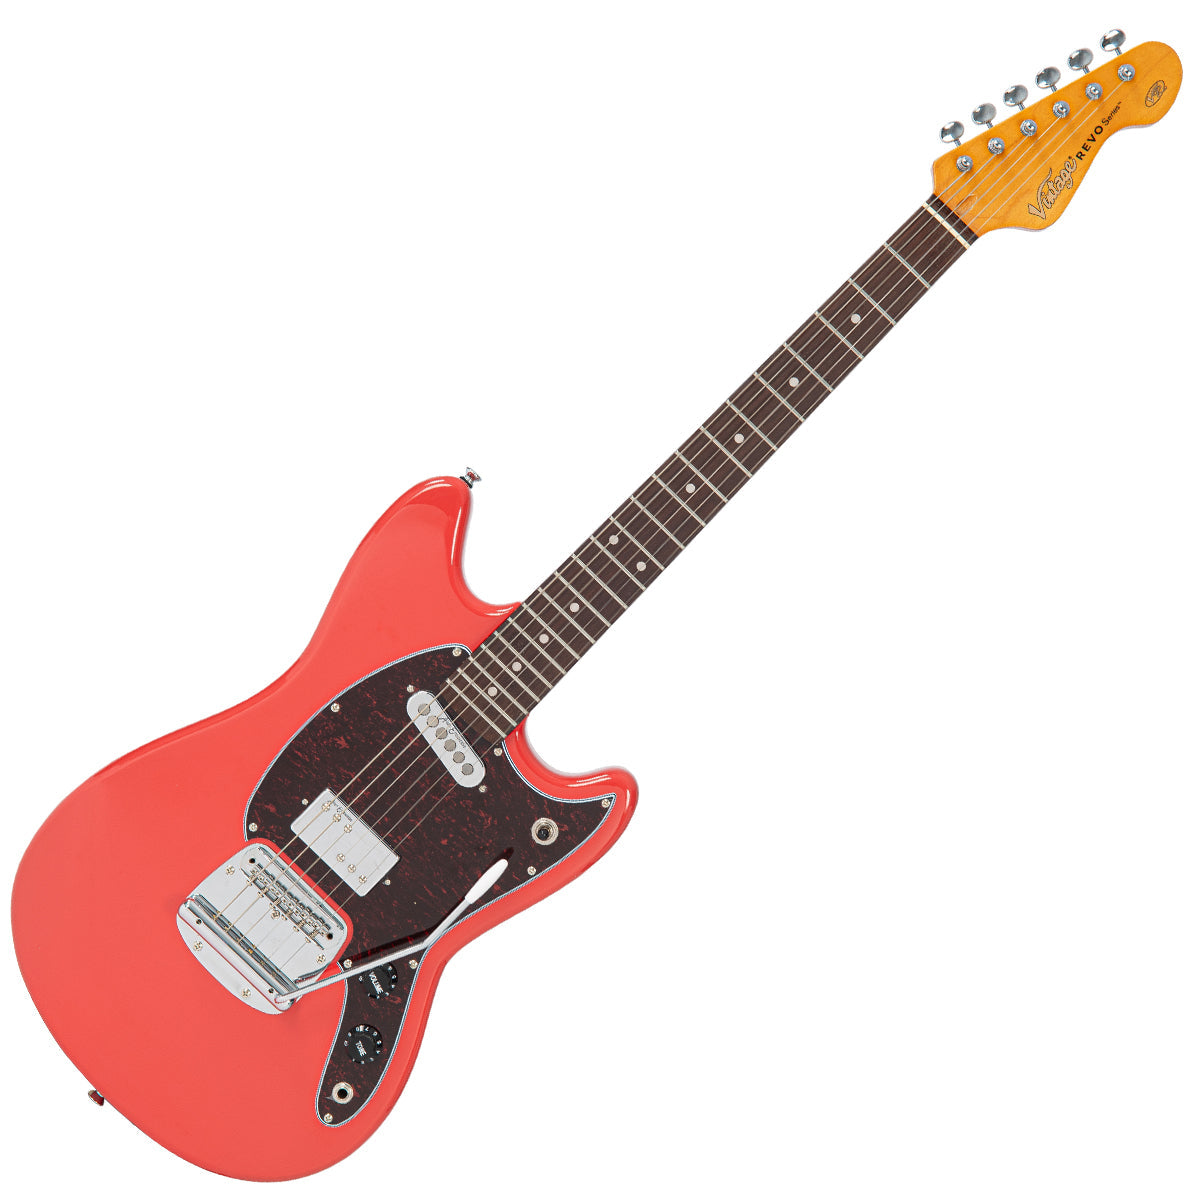 Vintage REVO Series 'Colt' HS Duo Electric Guitar ~ Firenza Red, Electric Guitars for sale at Richards Guitars.